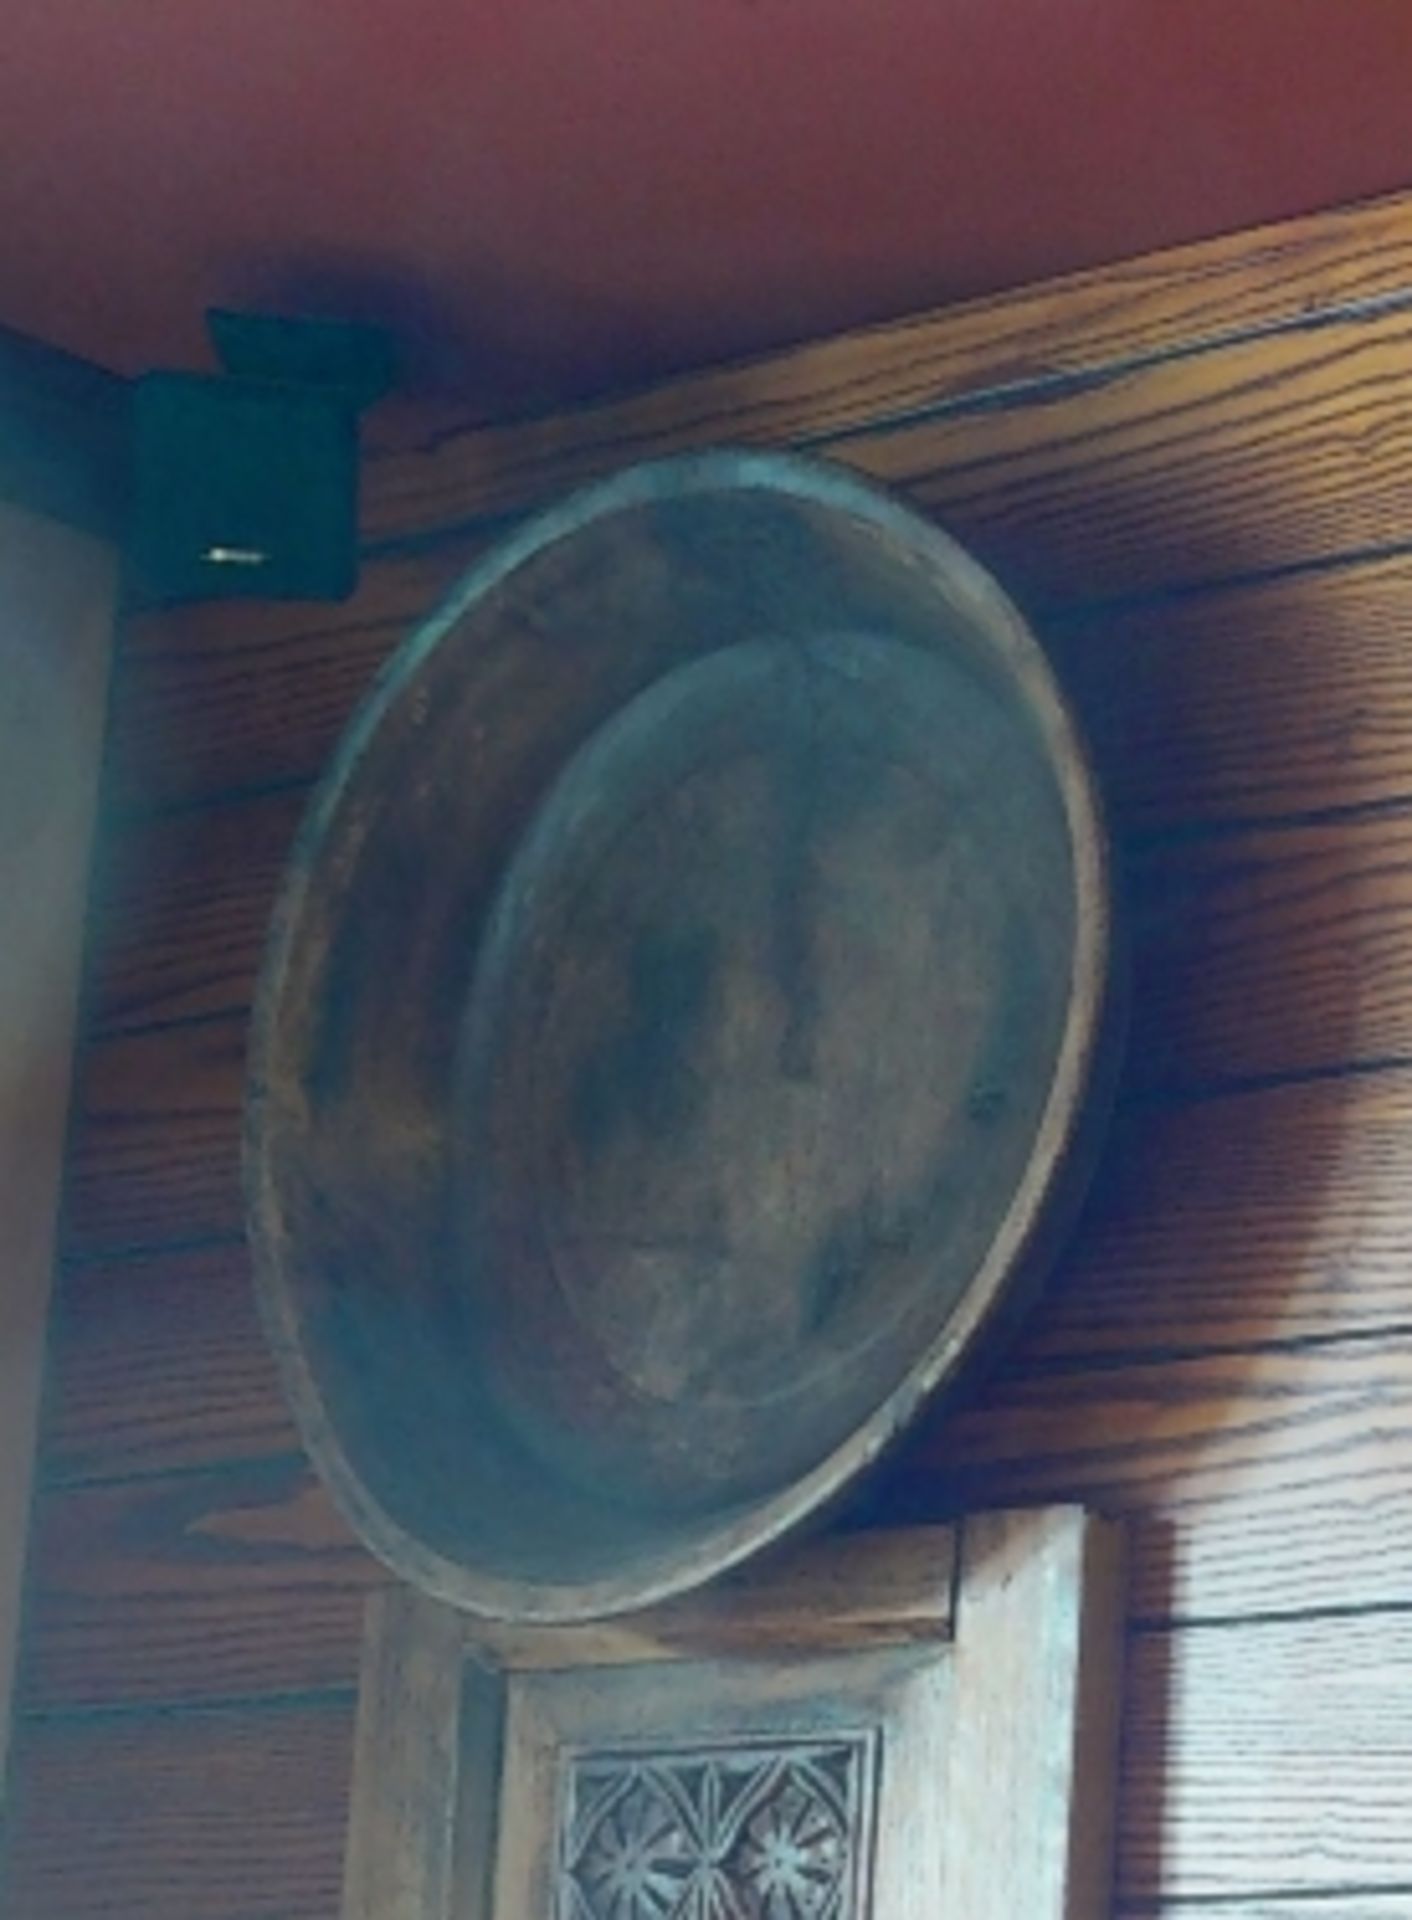 11 x Large Rustic Wooden Dishes - Wall Art From a Mexican Themed Restaurant - Image 5 of 8